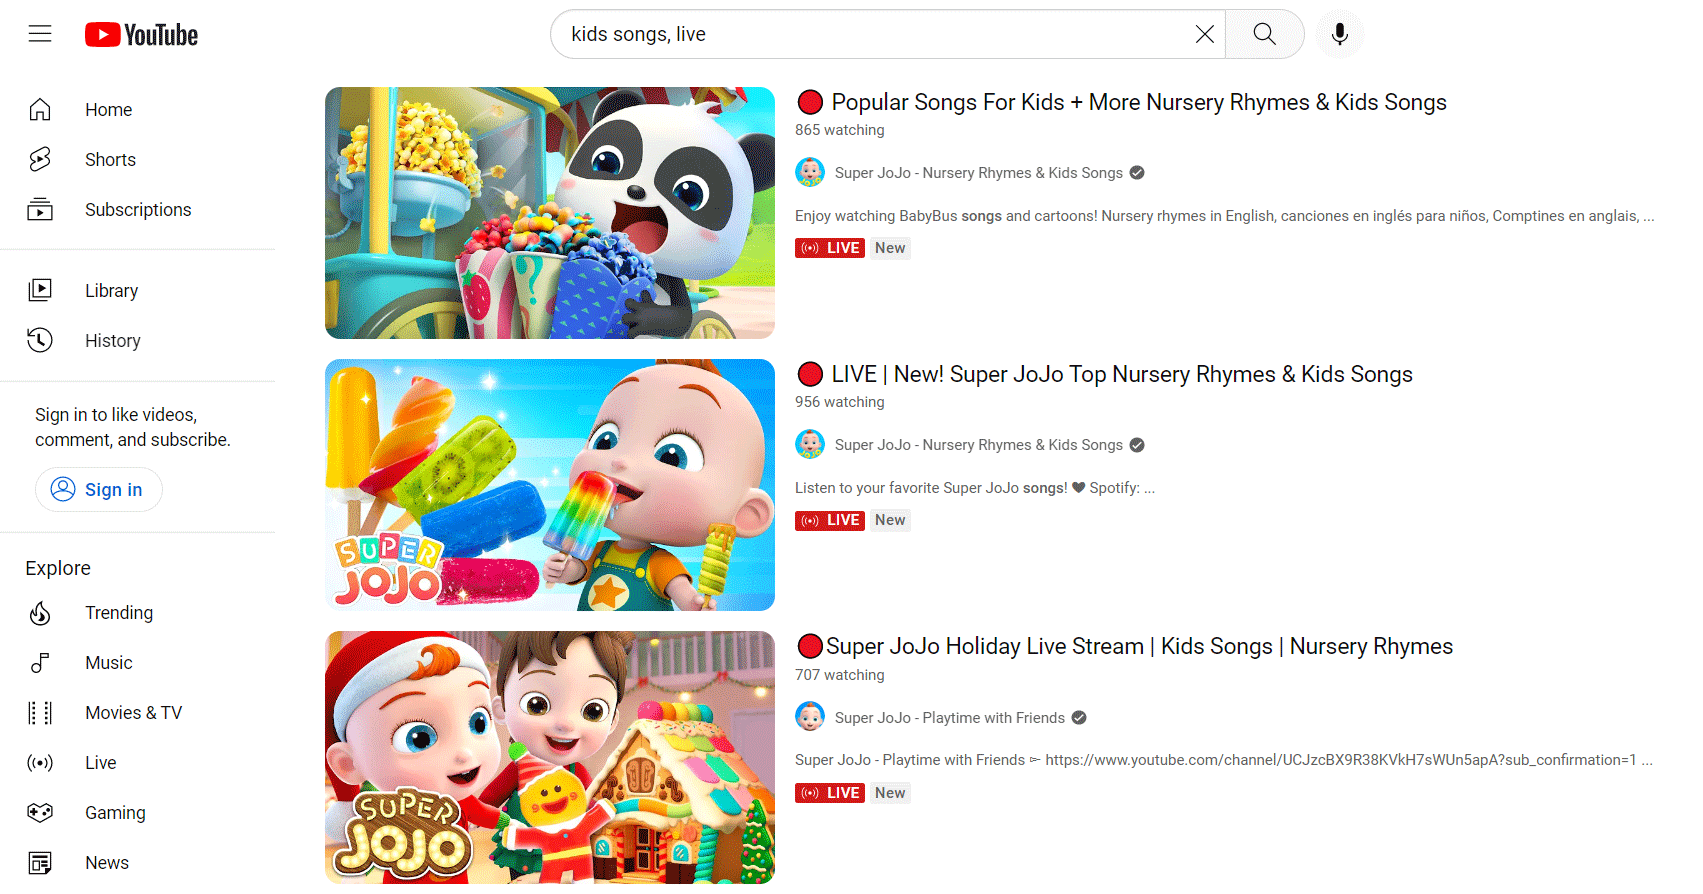 Advanced search command example: kids songs, live